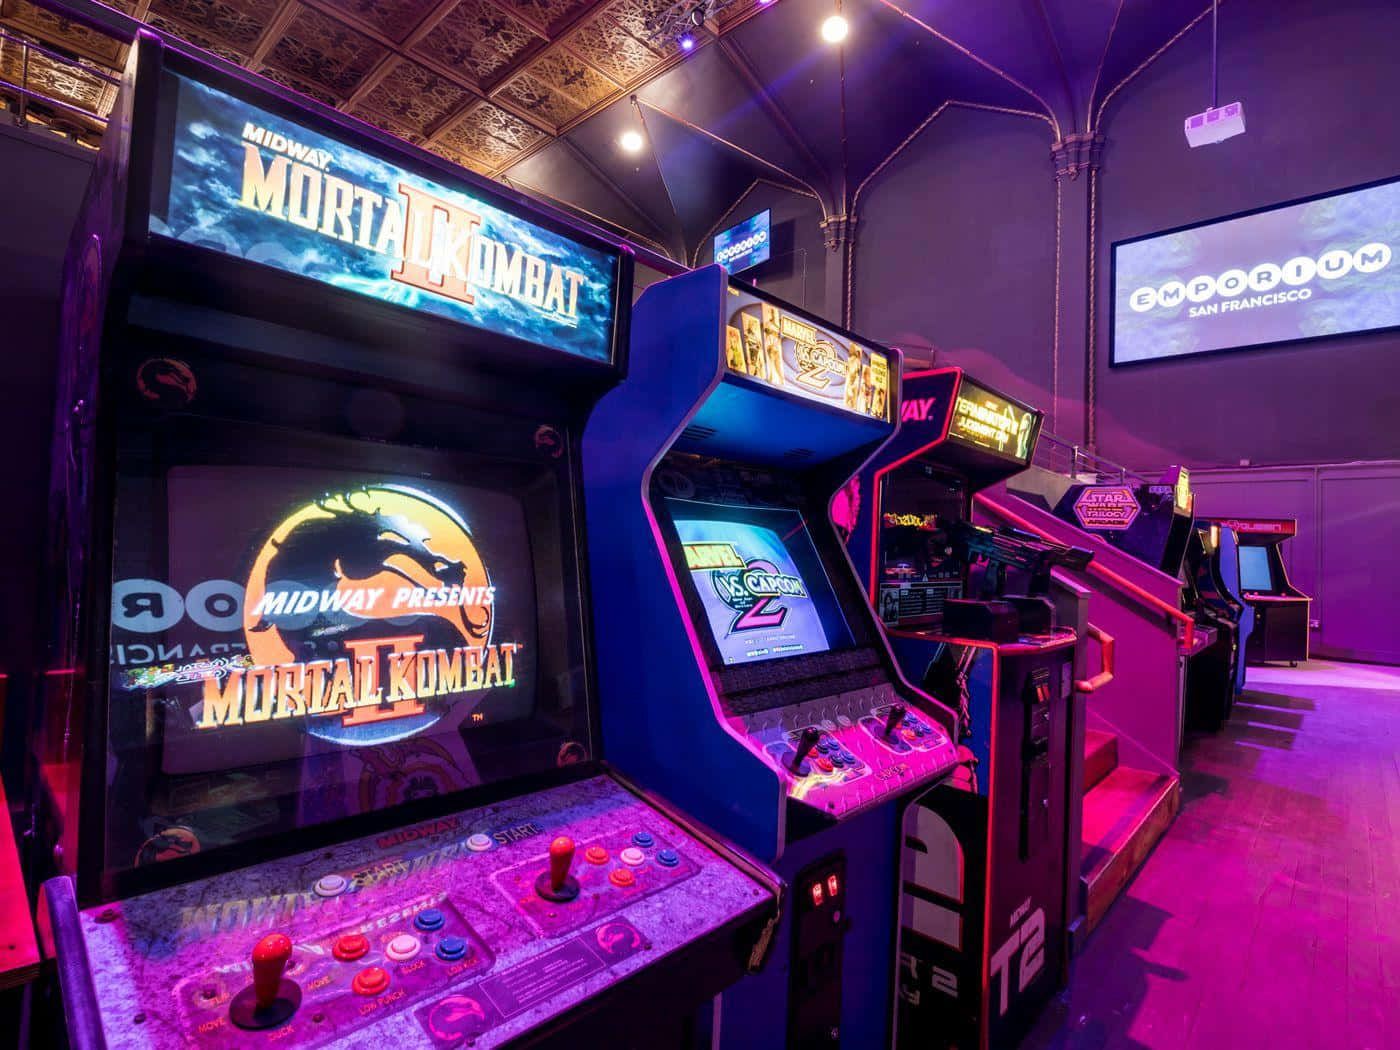 A row of video games, including Mortal Kombat, in a dark room with purple lighting. - Arcade